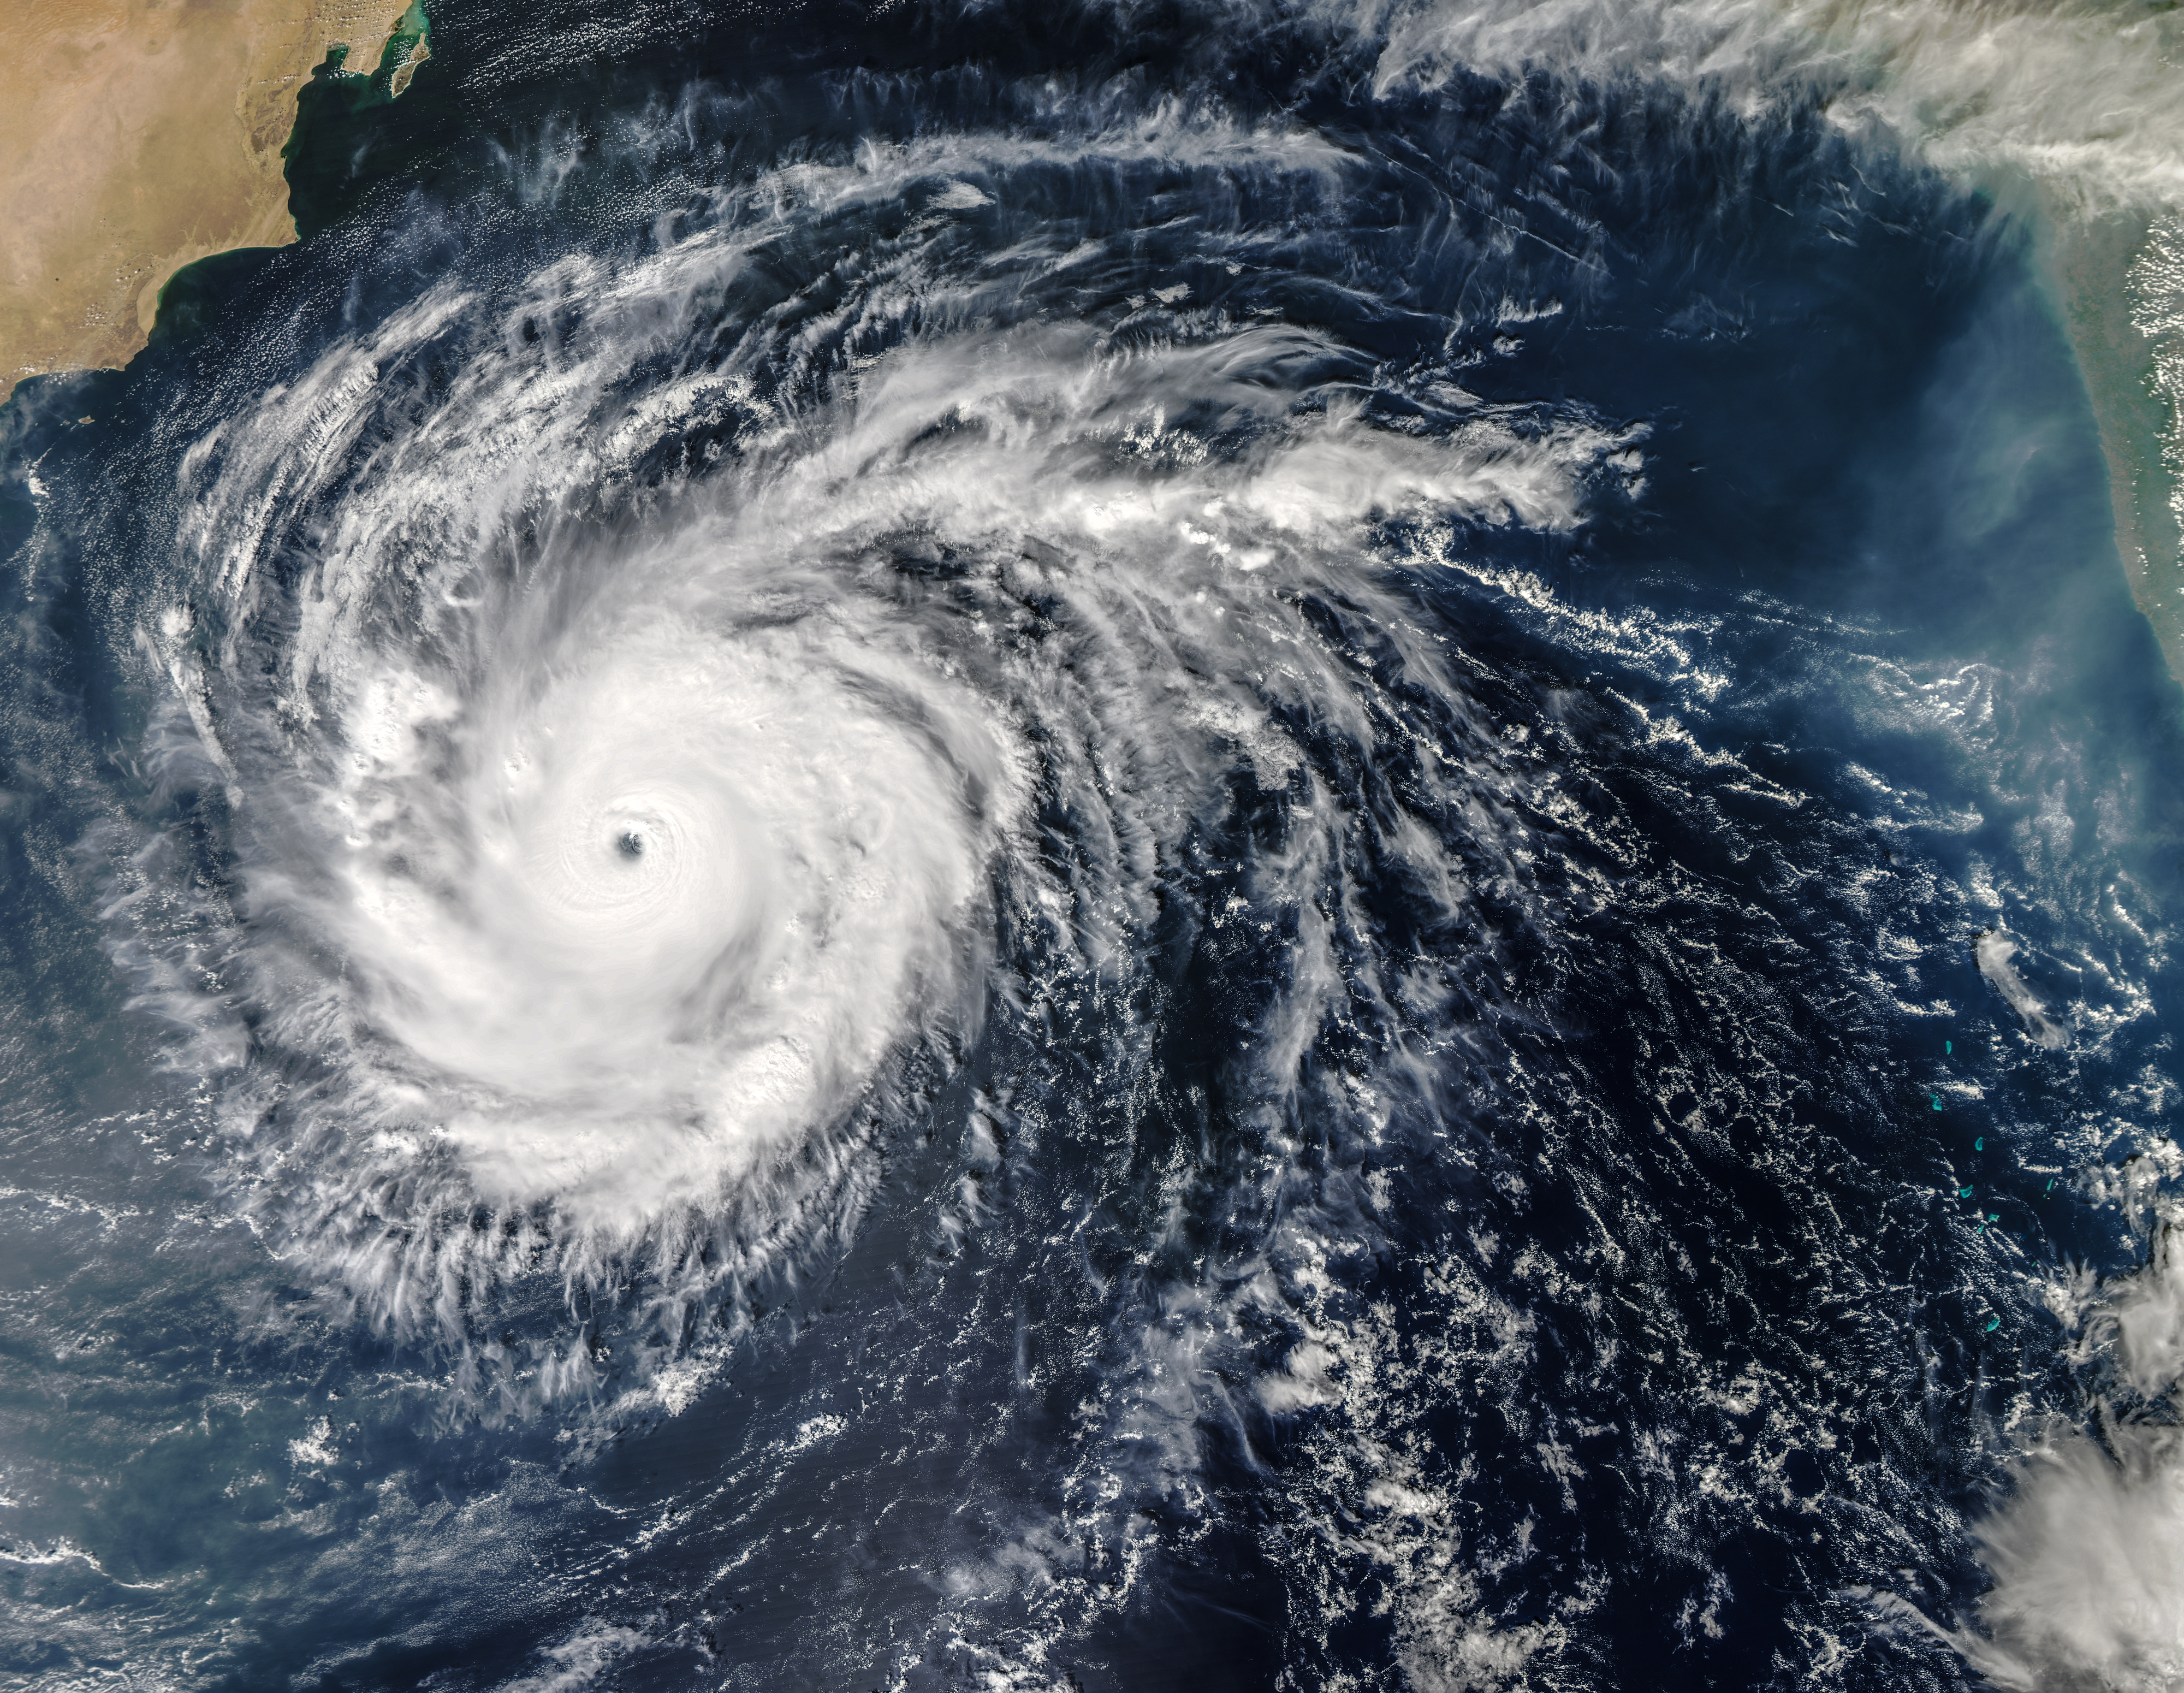 Tropical cyclones in the Arabian Sea: Why are they increasing